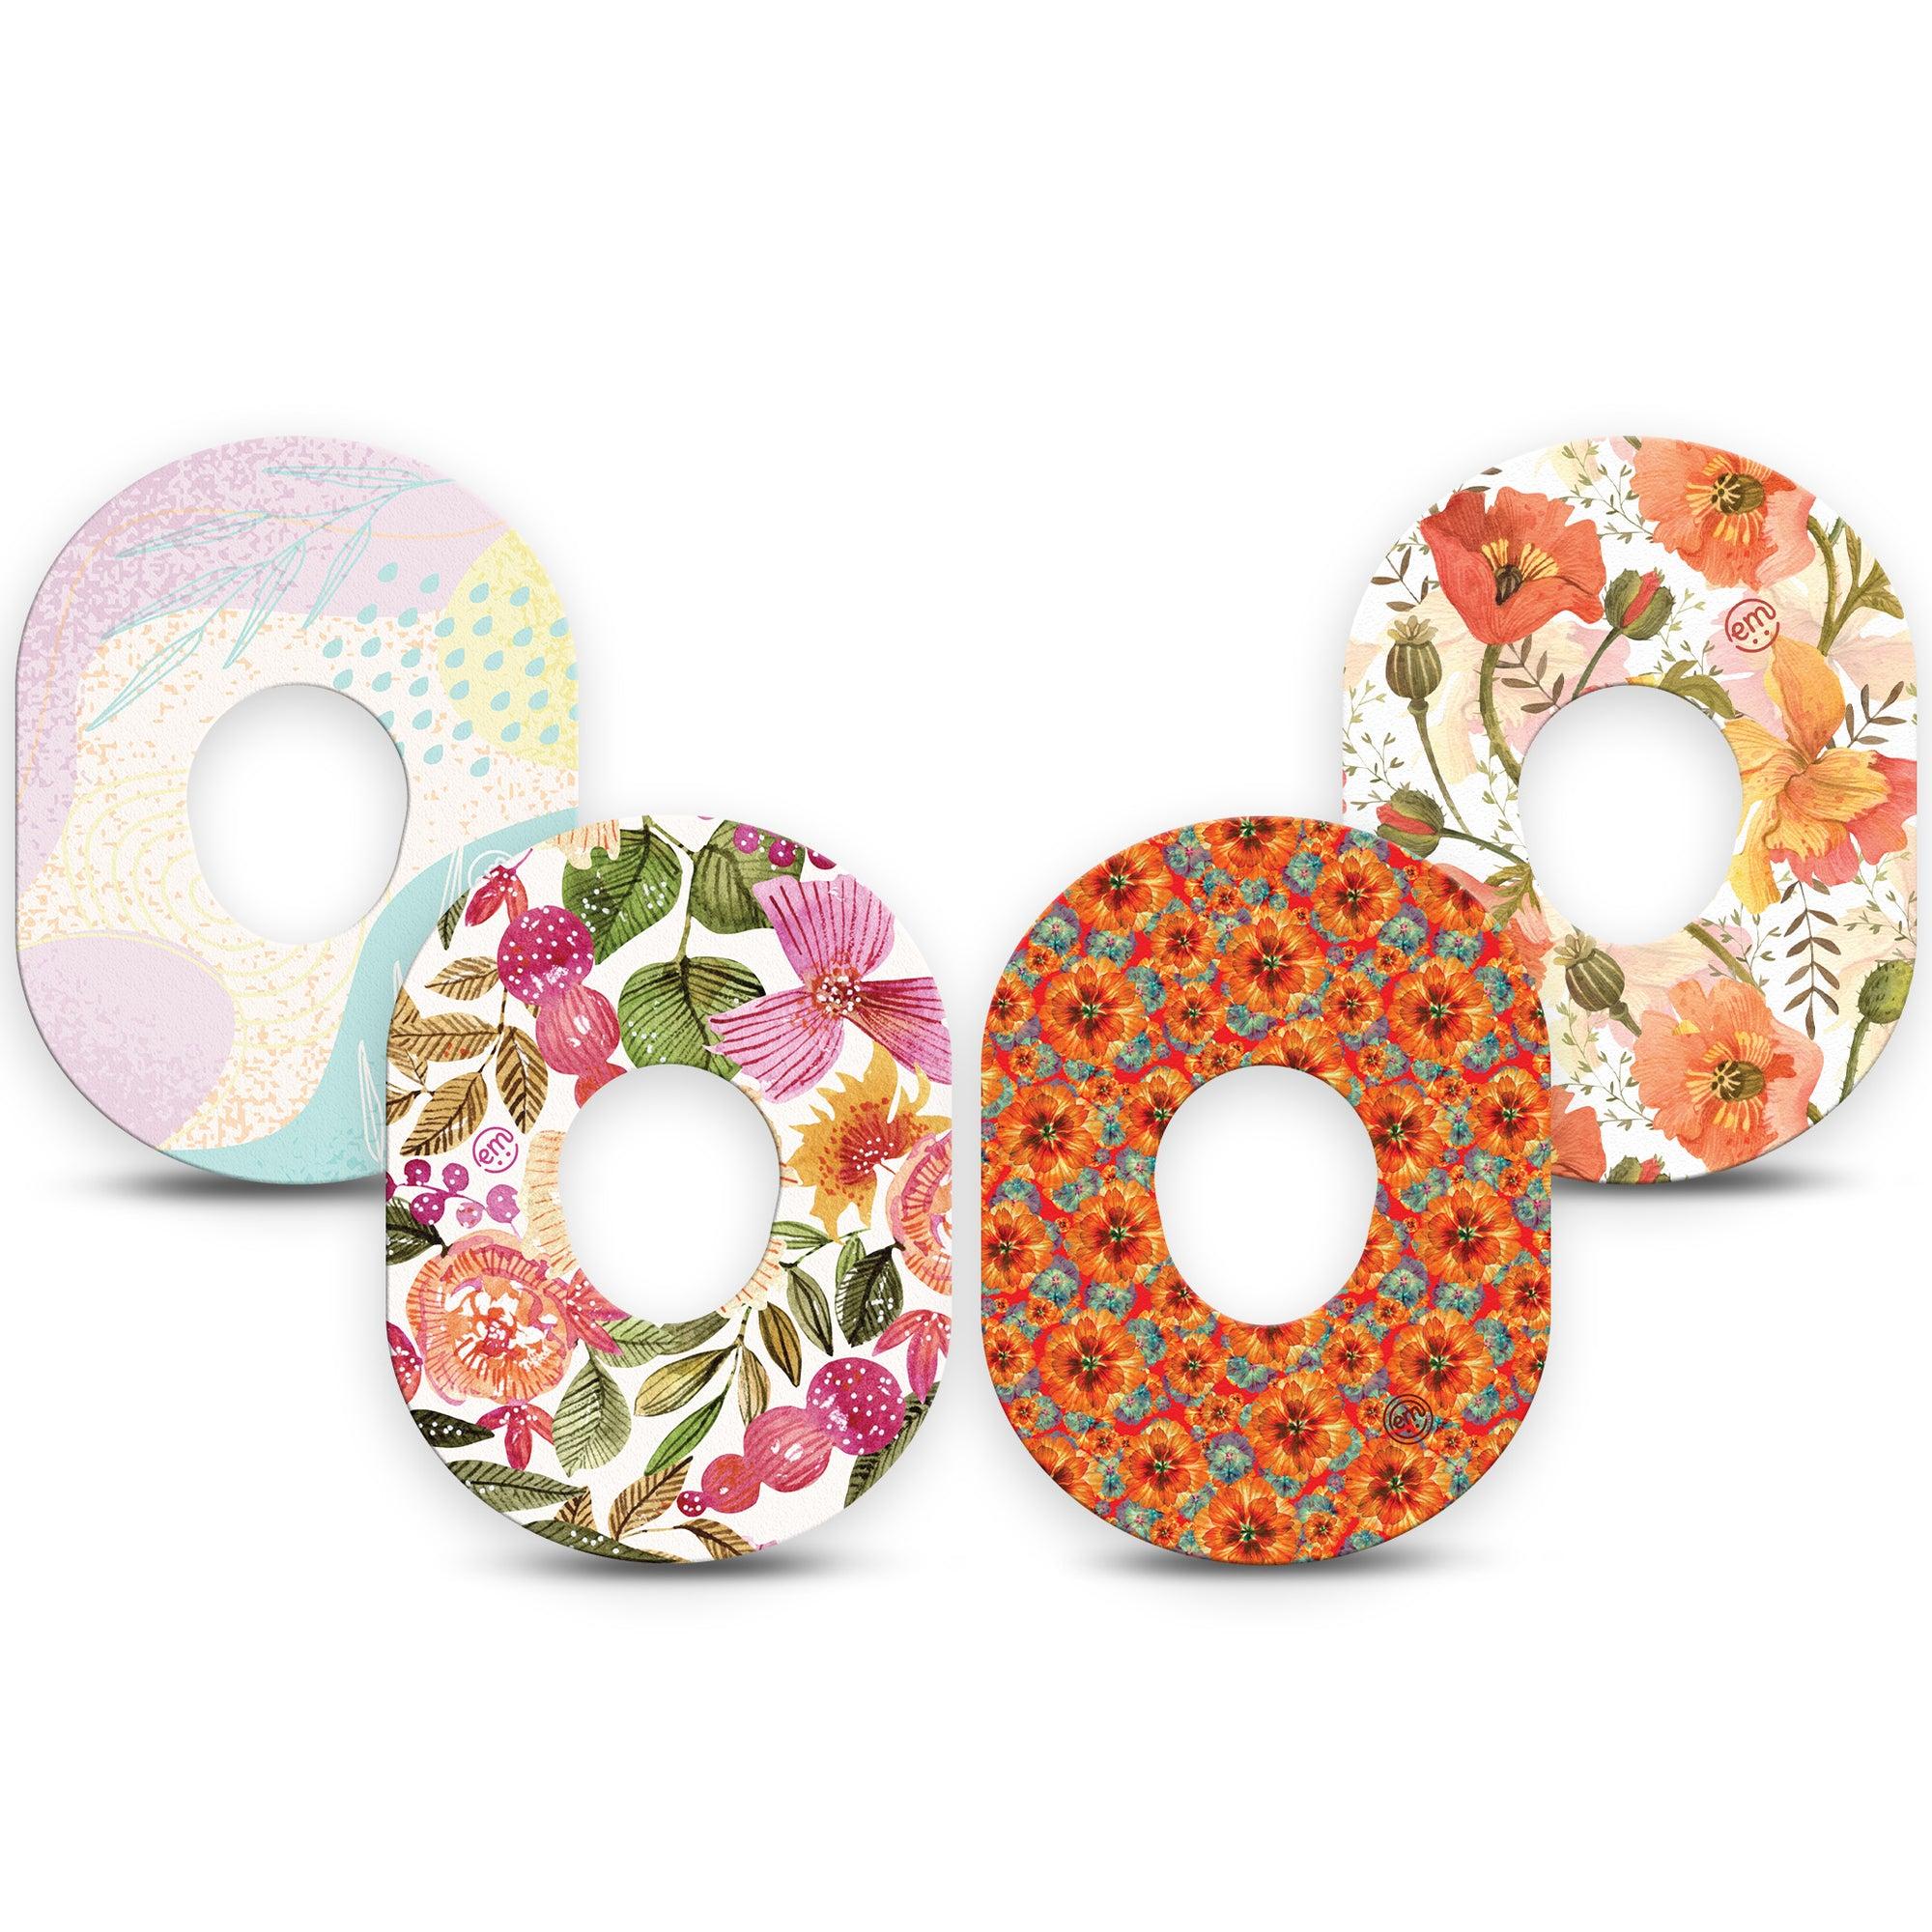 ExpressionMed Sunkissed Tropics Variety Pack Dexcom G6 Tape, 4-Pack, Elegant Blossom Themed, CGM Plaster Patch Design